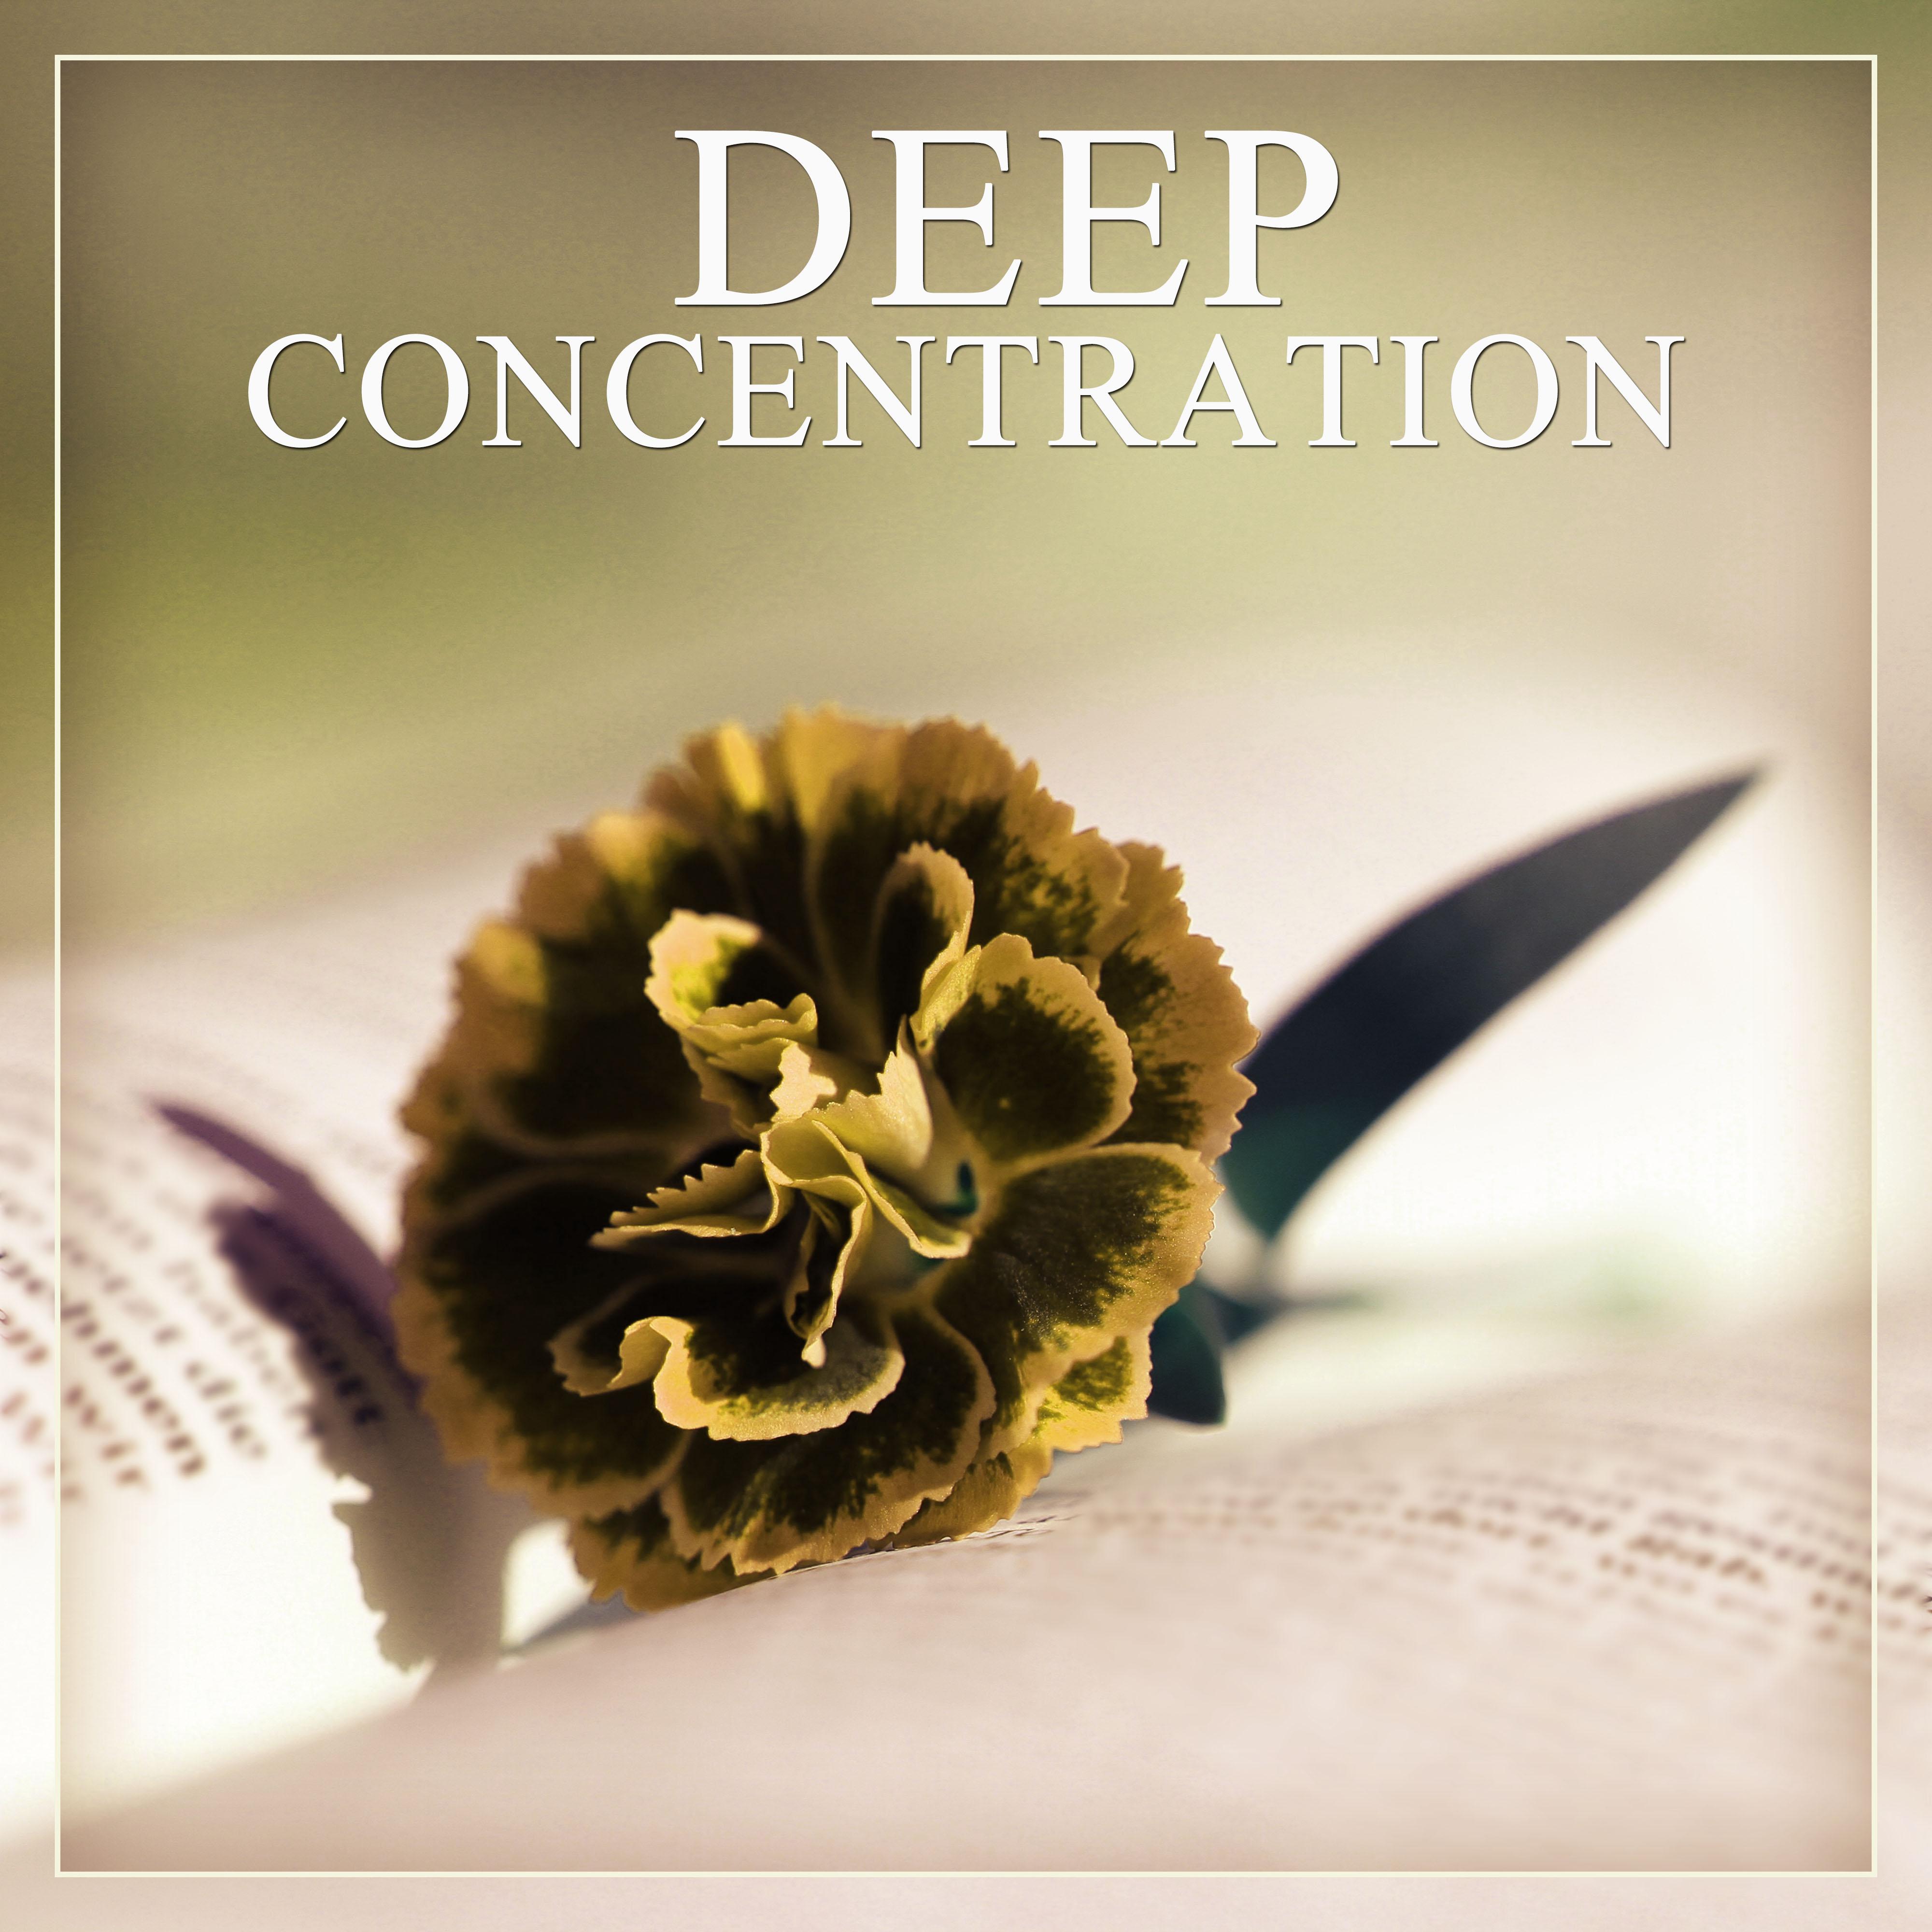 Deep Concentration  Nature Sounds, Healing Music, Relaxing Study, Soft Music, Restful